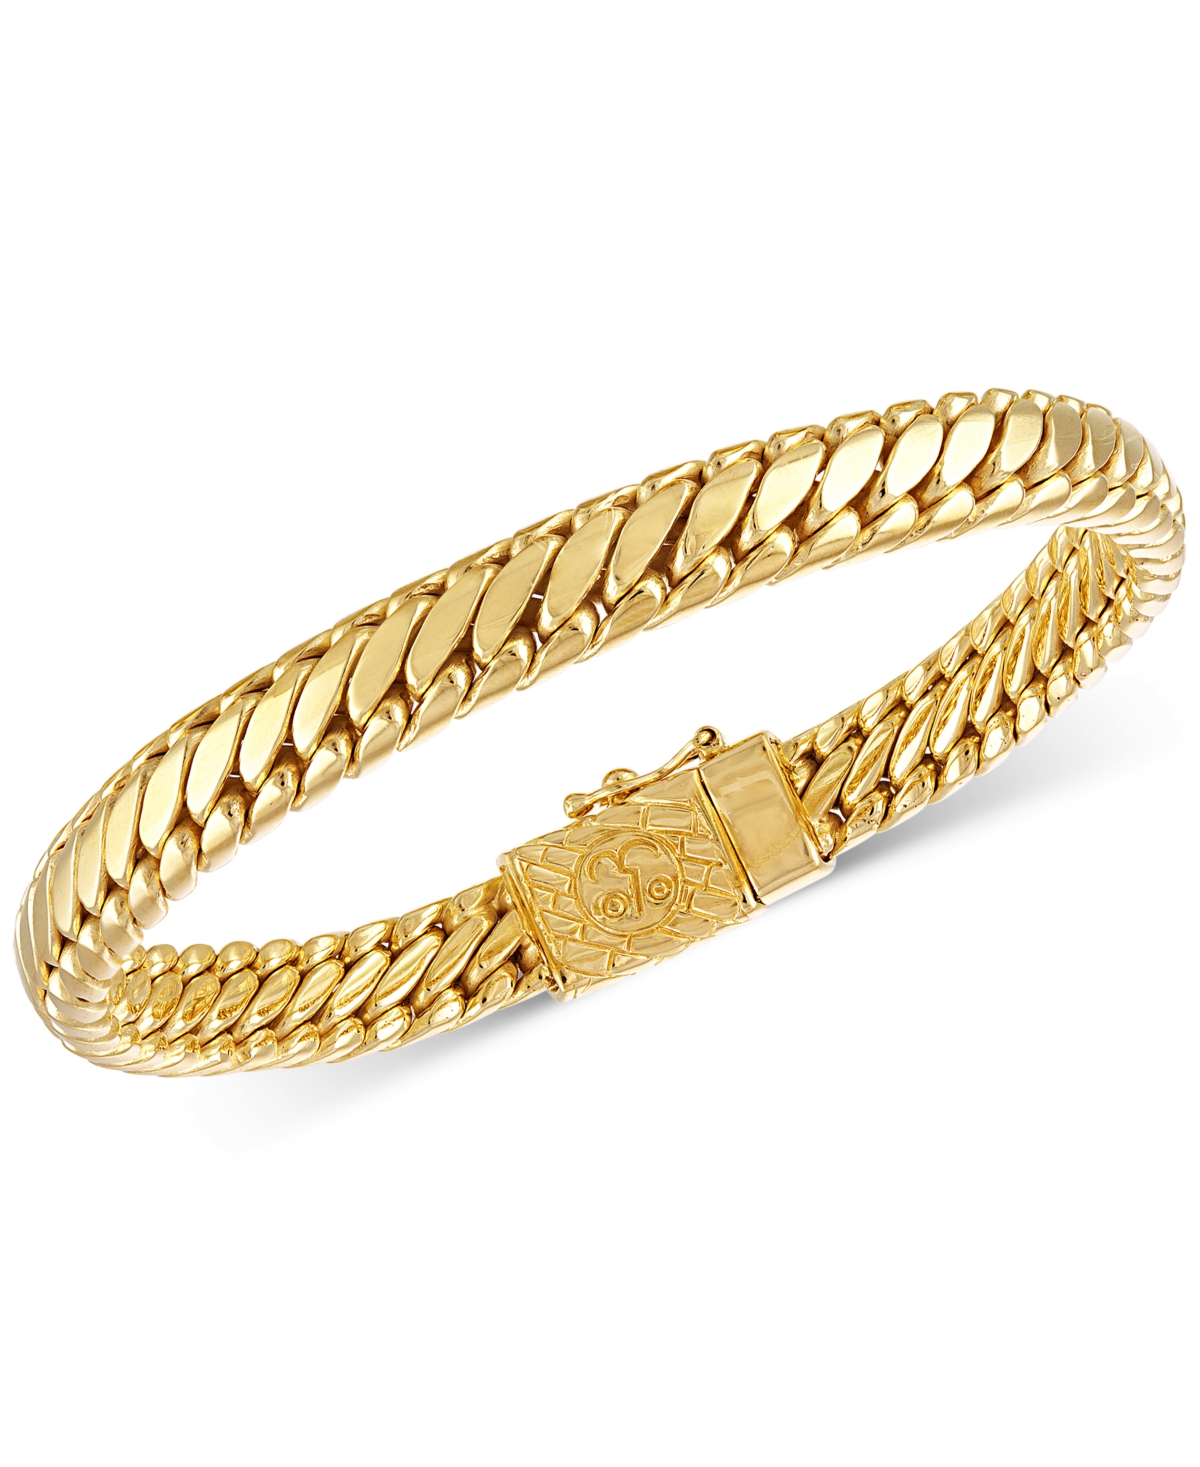 Esquire Men's Jewelry Heavy Serpentine Link Bracelet in 14k Gold-Plated Silver, Also available in Sterling Silver, Created for Macy's